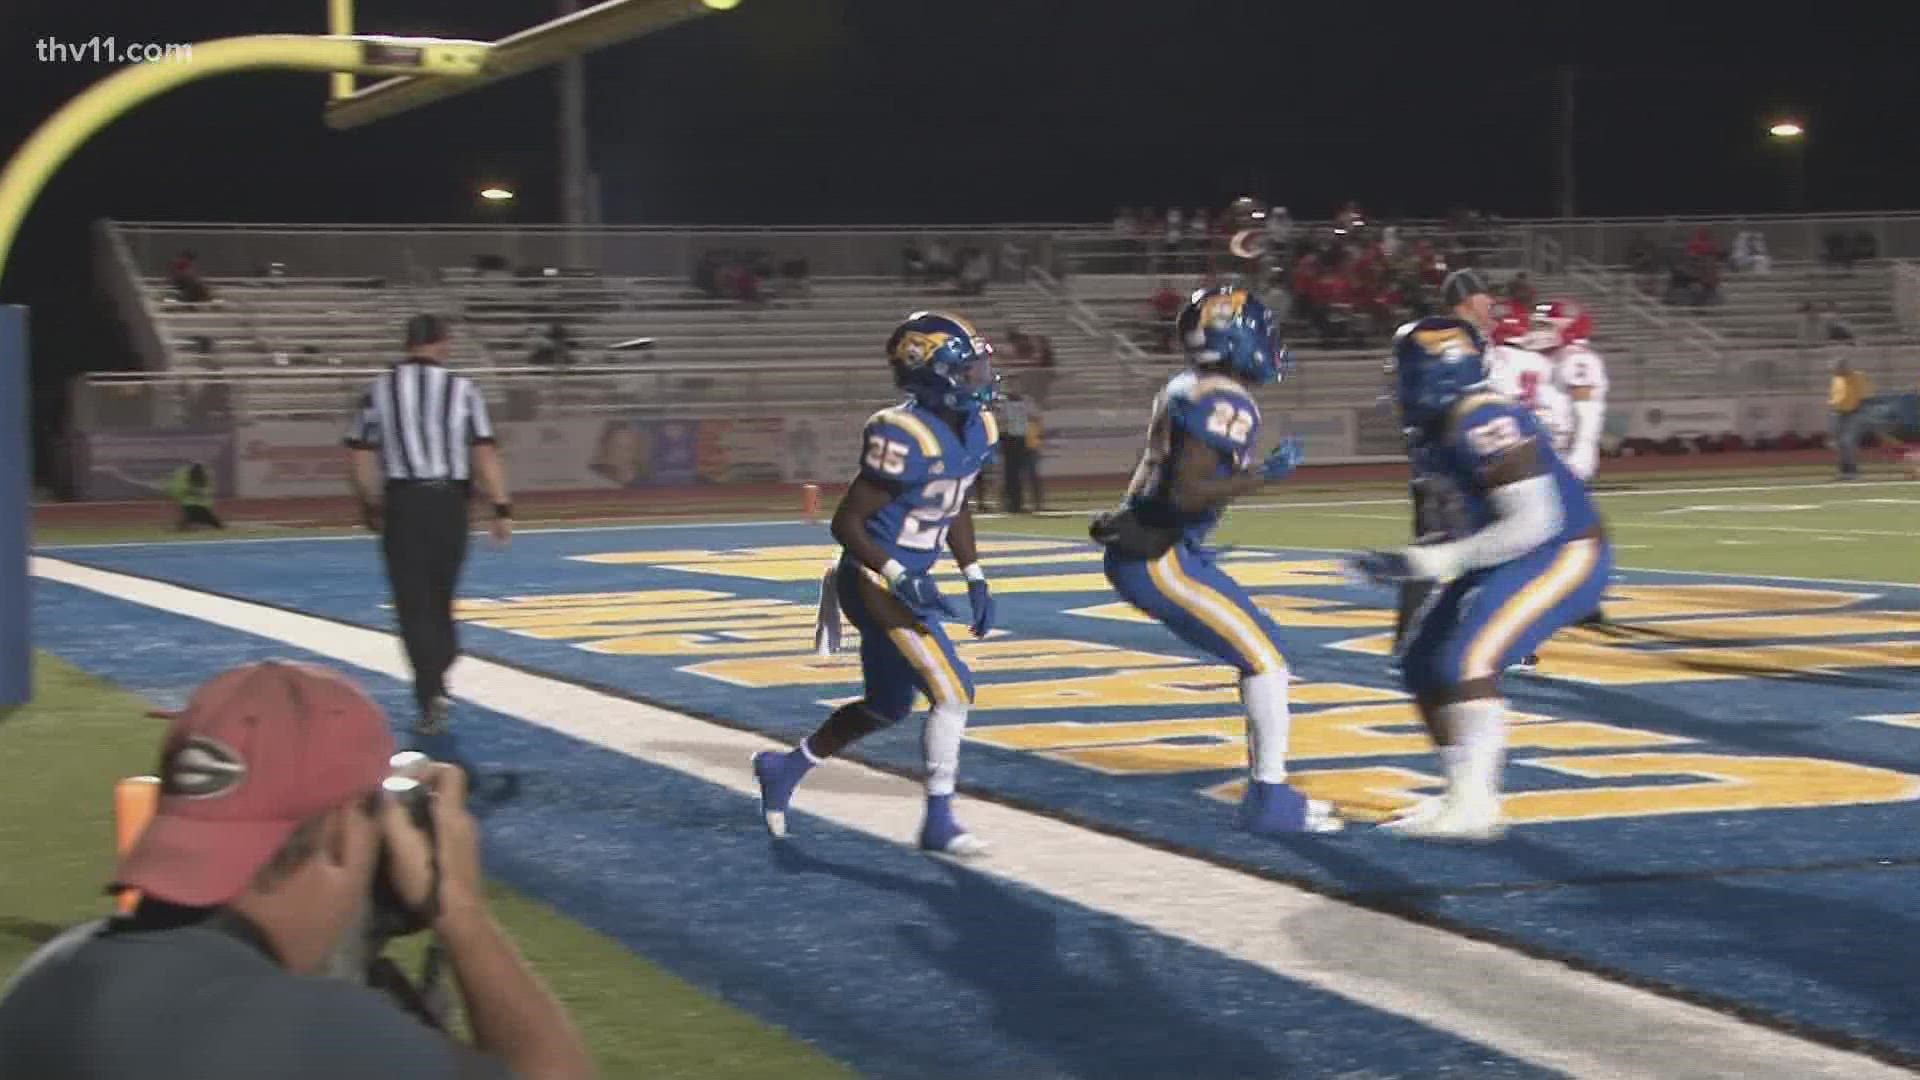 The North Little Rock Charging Wildcats defeated the Fort Smith Northside Grizzlies, 28-21